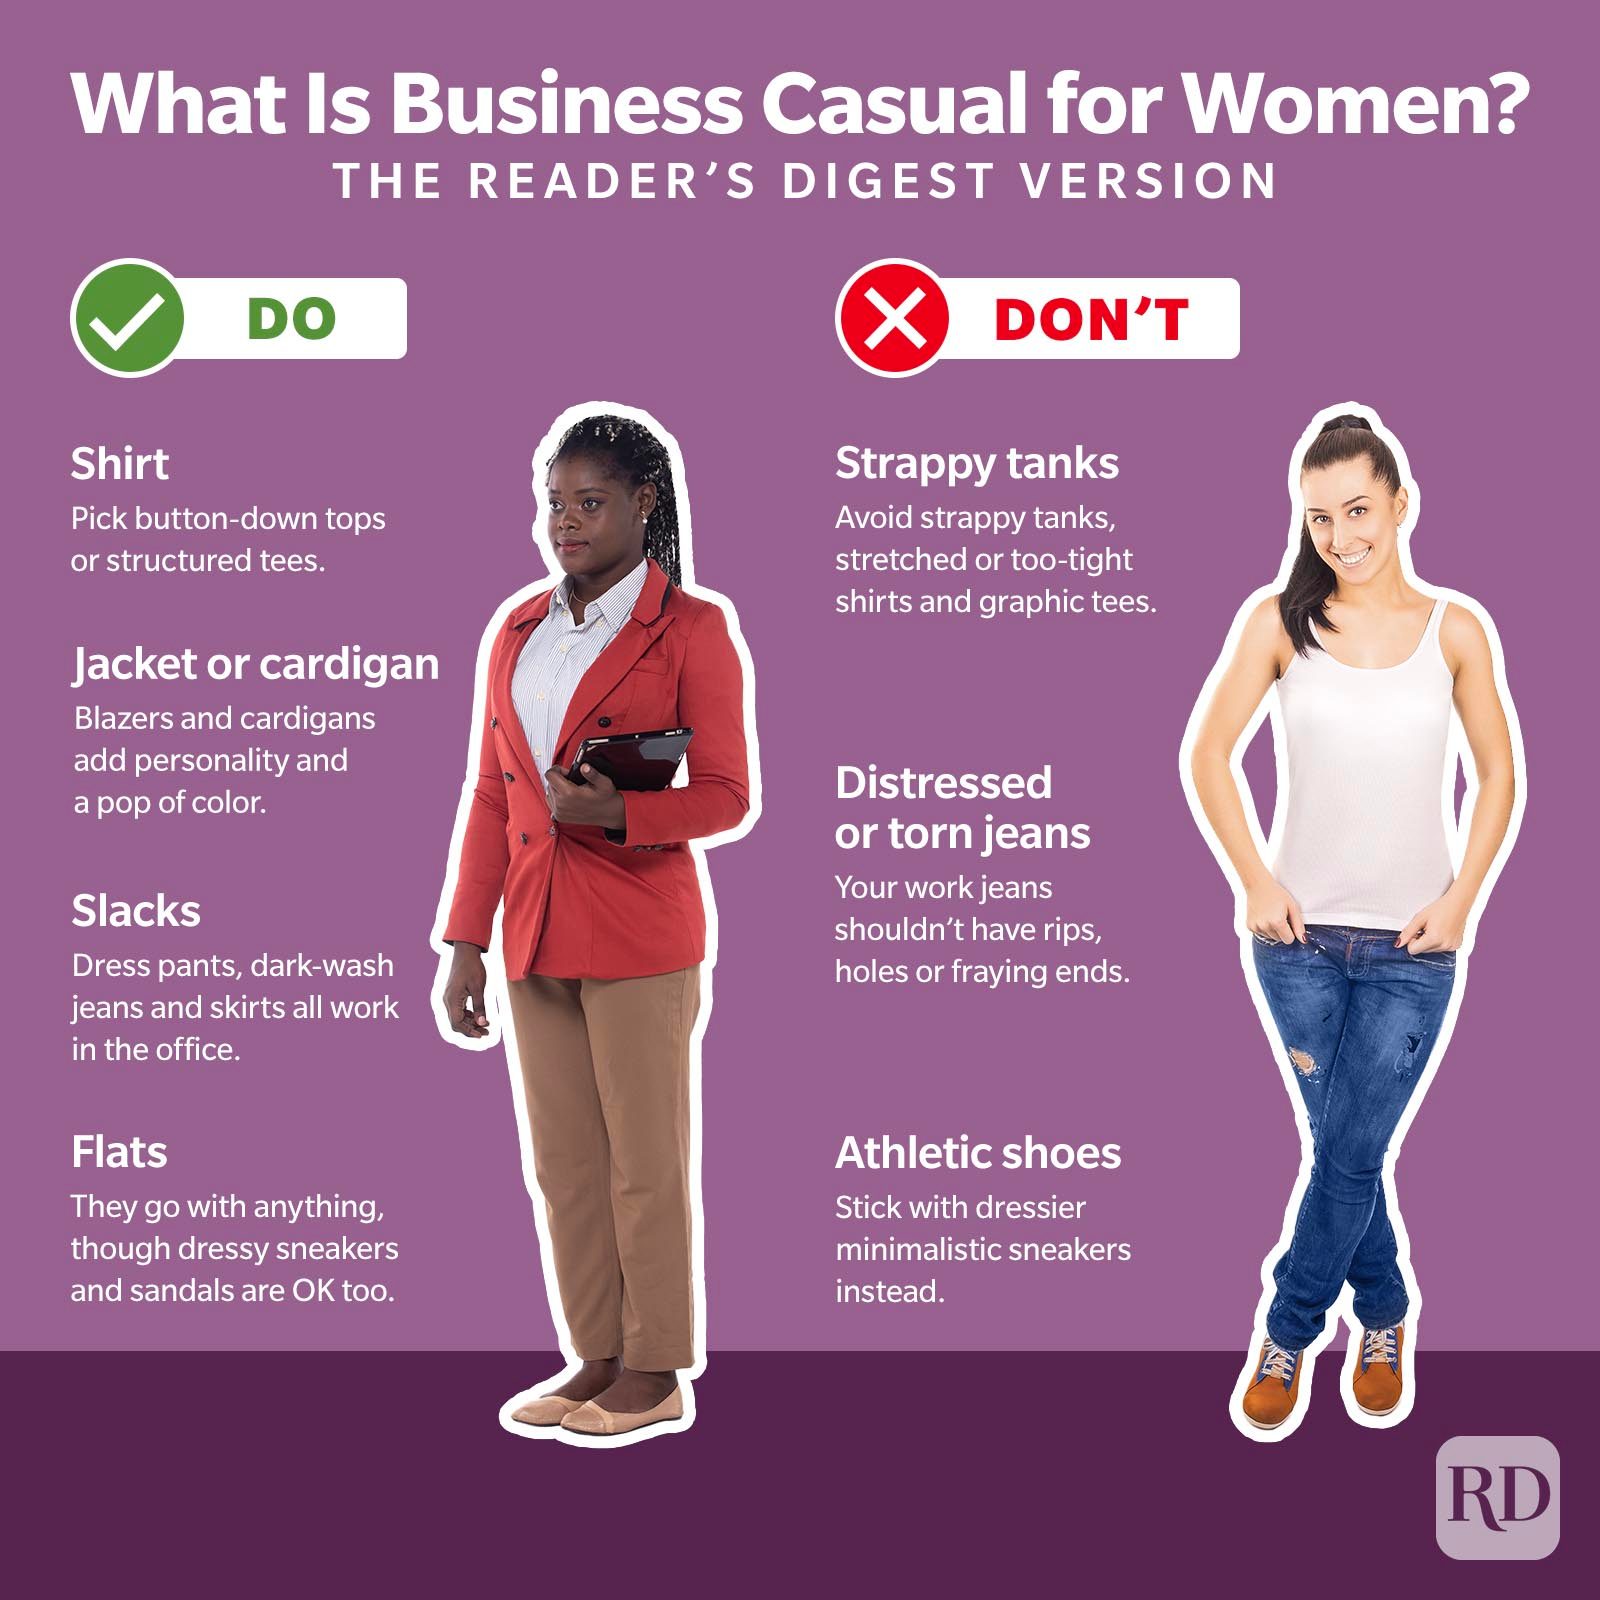 What Is Business Casual Attire?